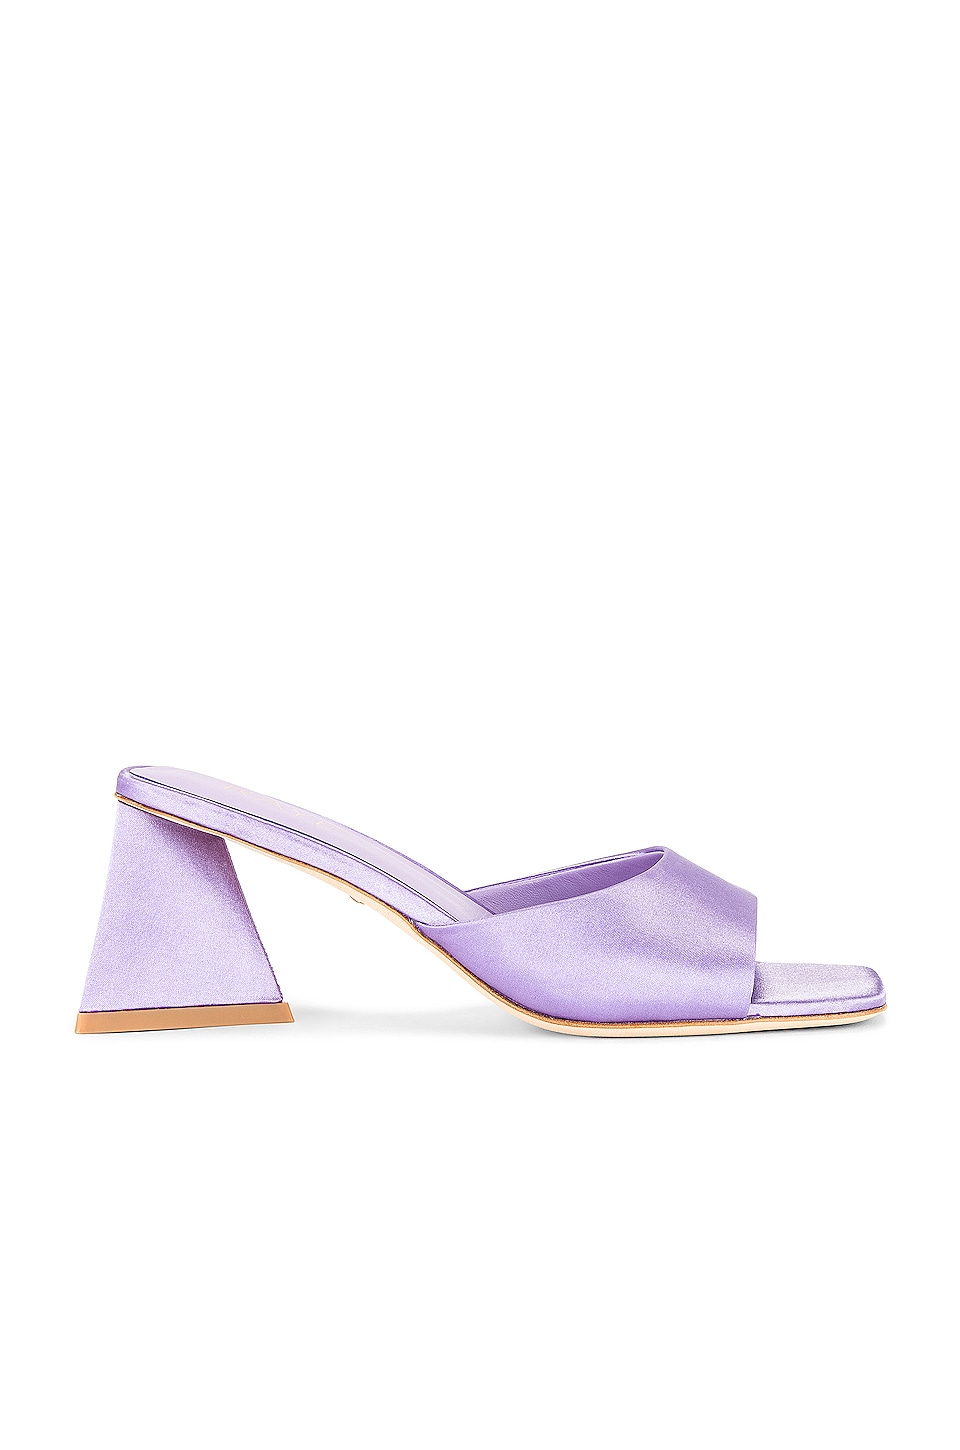 Comfy lavender mules with block heel